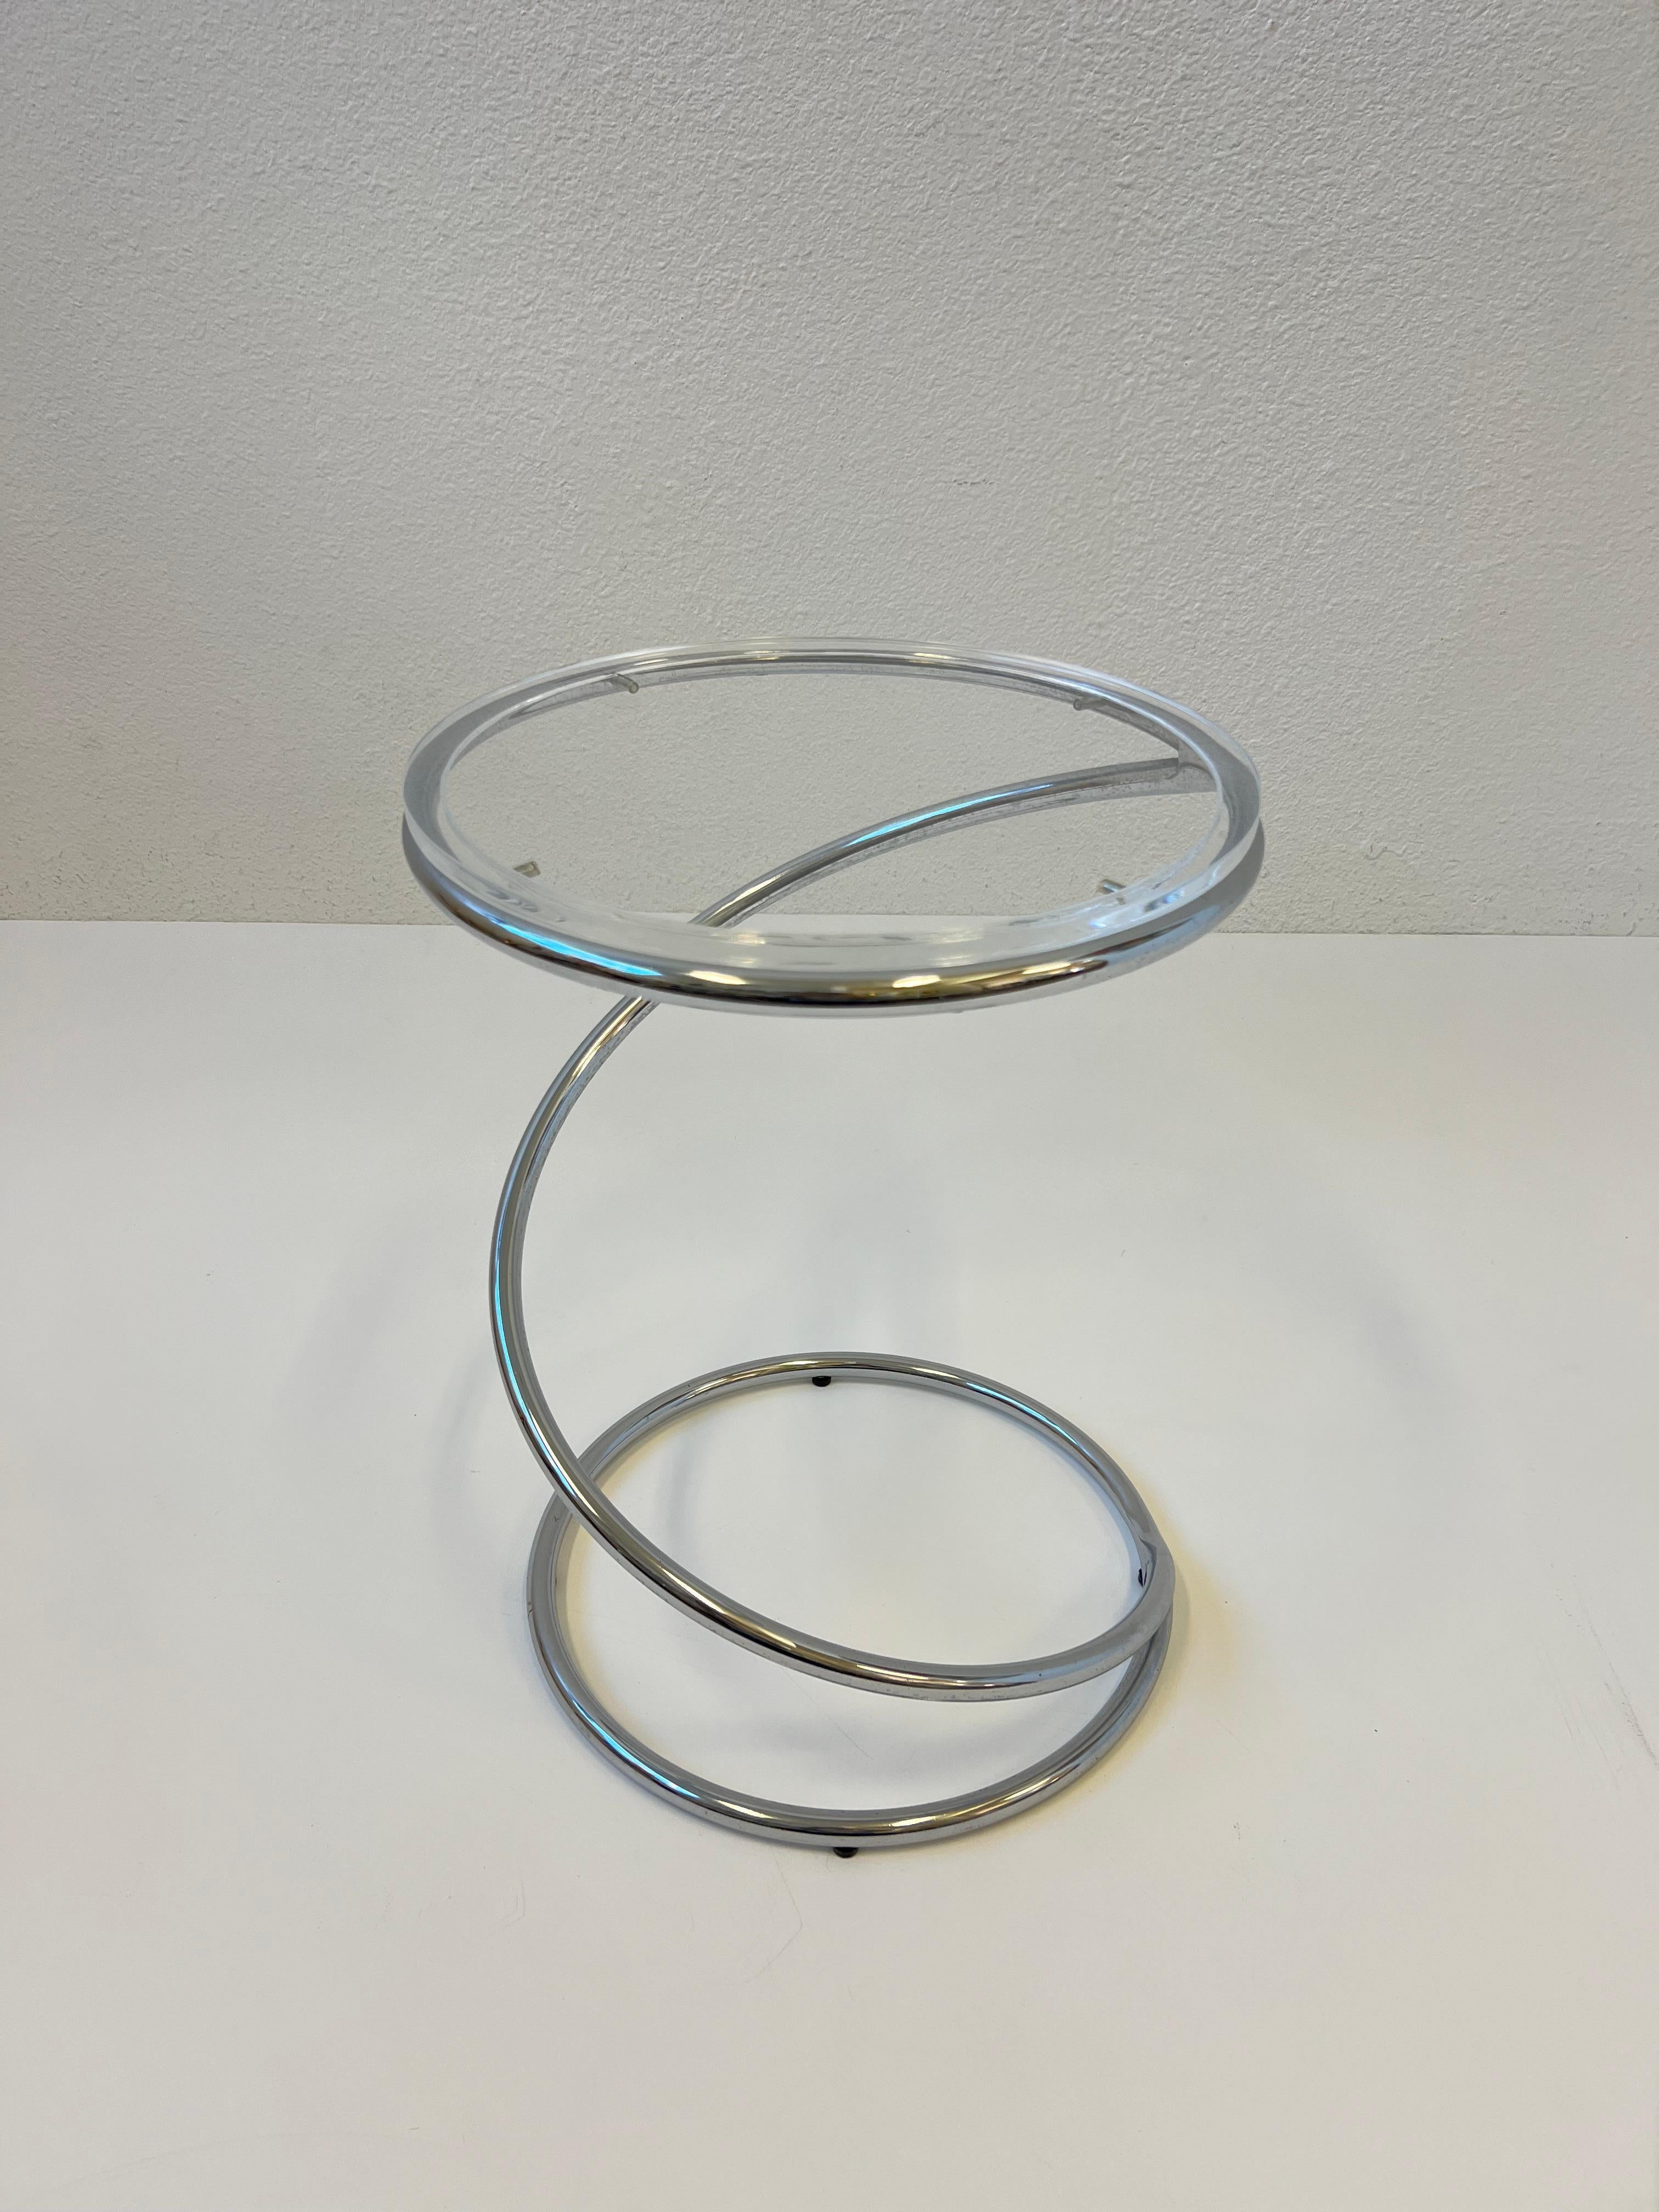 American Polished Chrome and Lucite Spiral Occasional Table by Leon Rosen for Pace